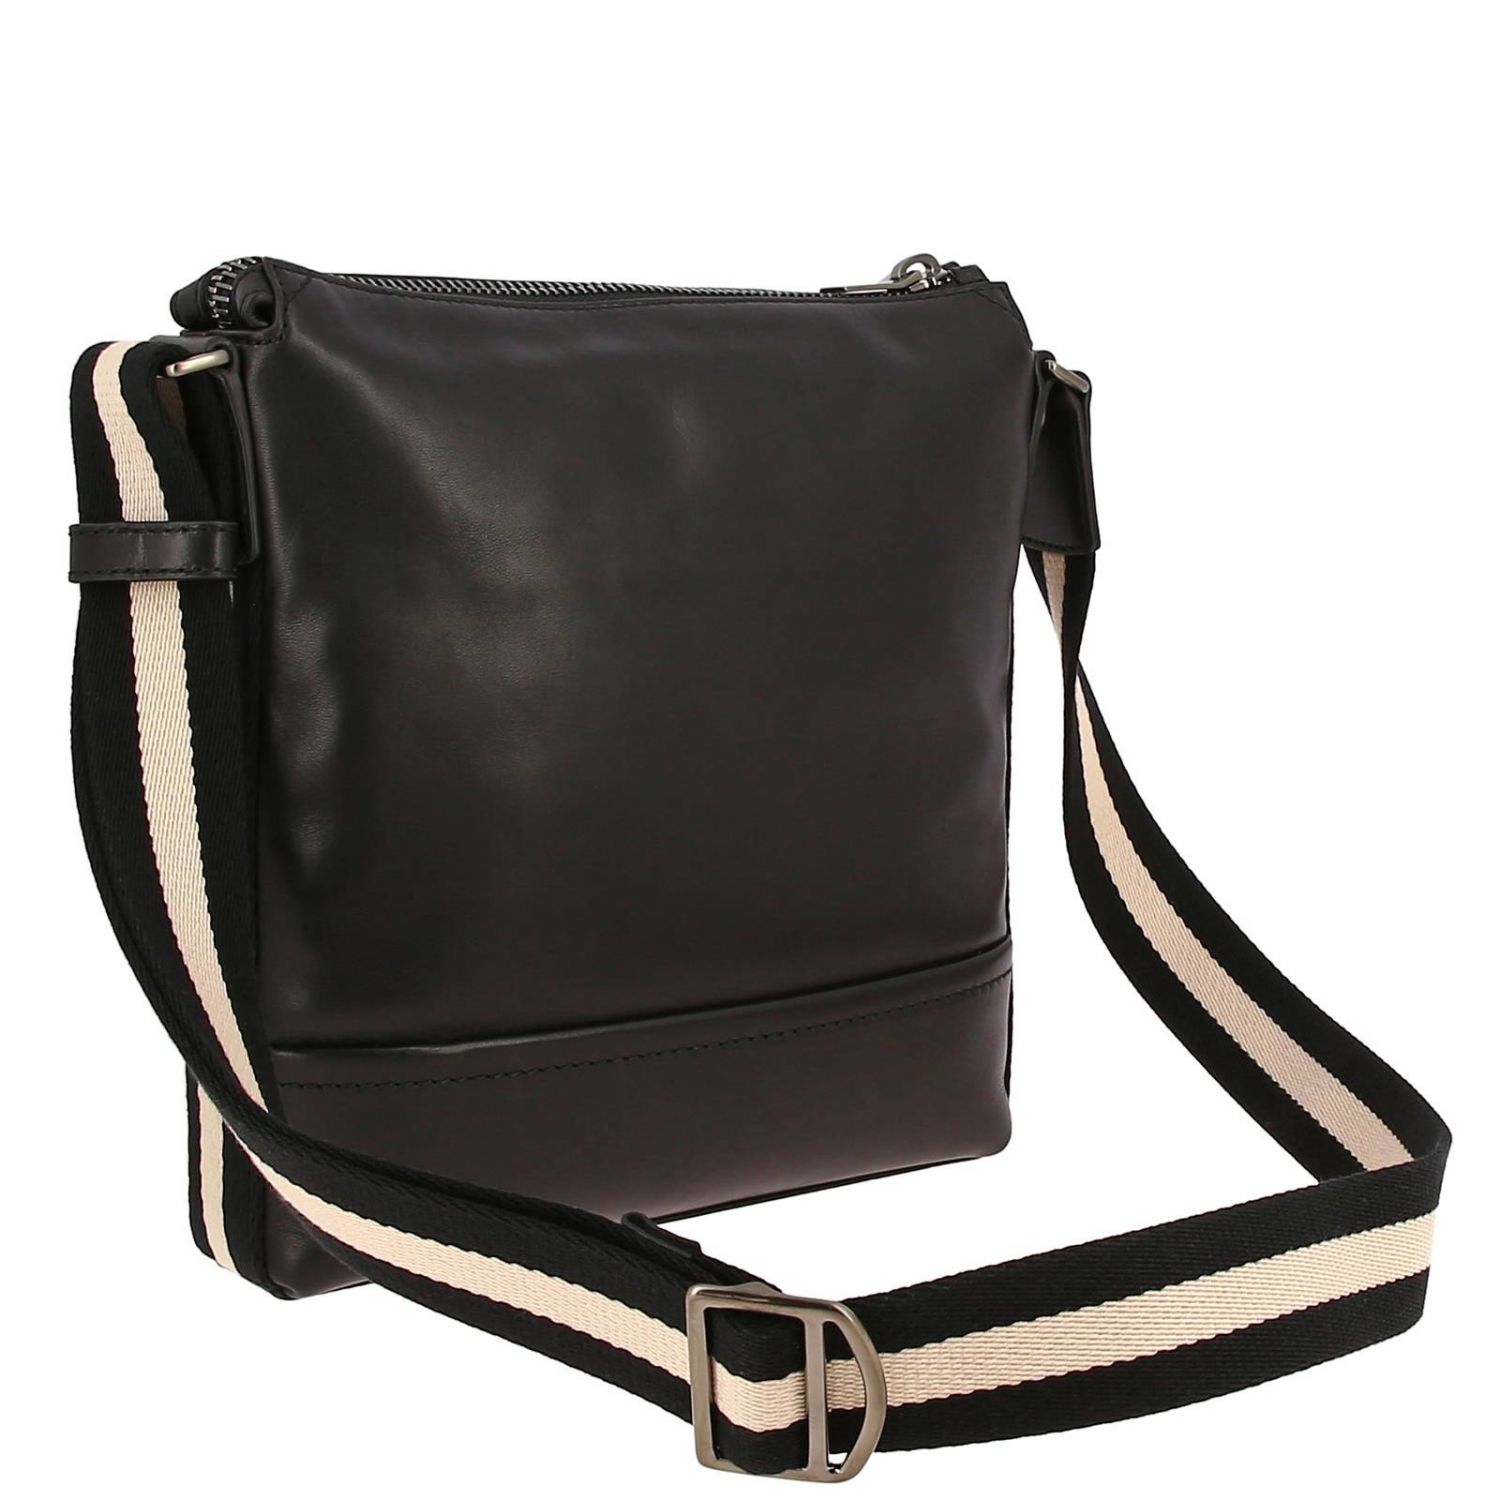 Bally Outlet: Trezzini leather bag with trainspotting details - Black ...